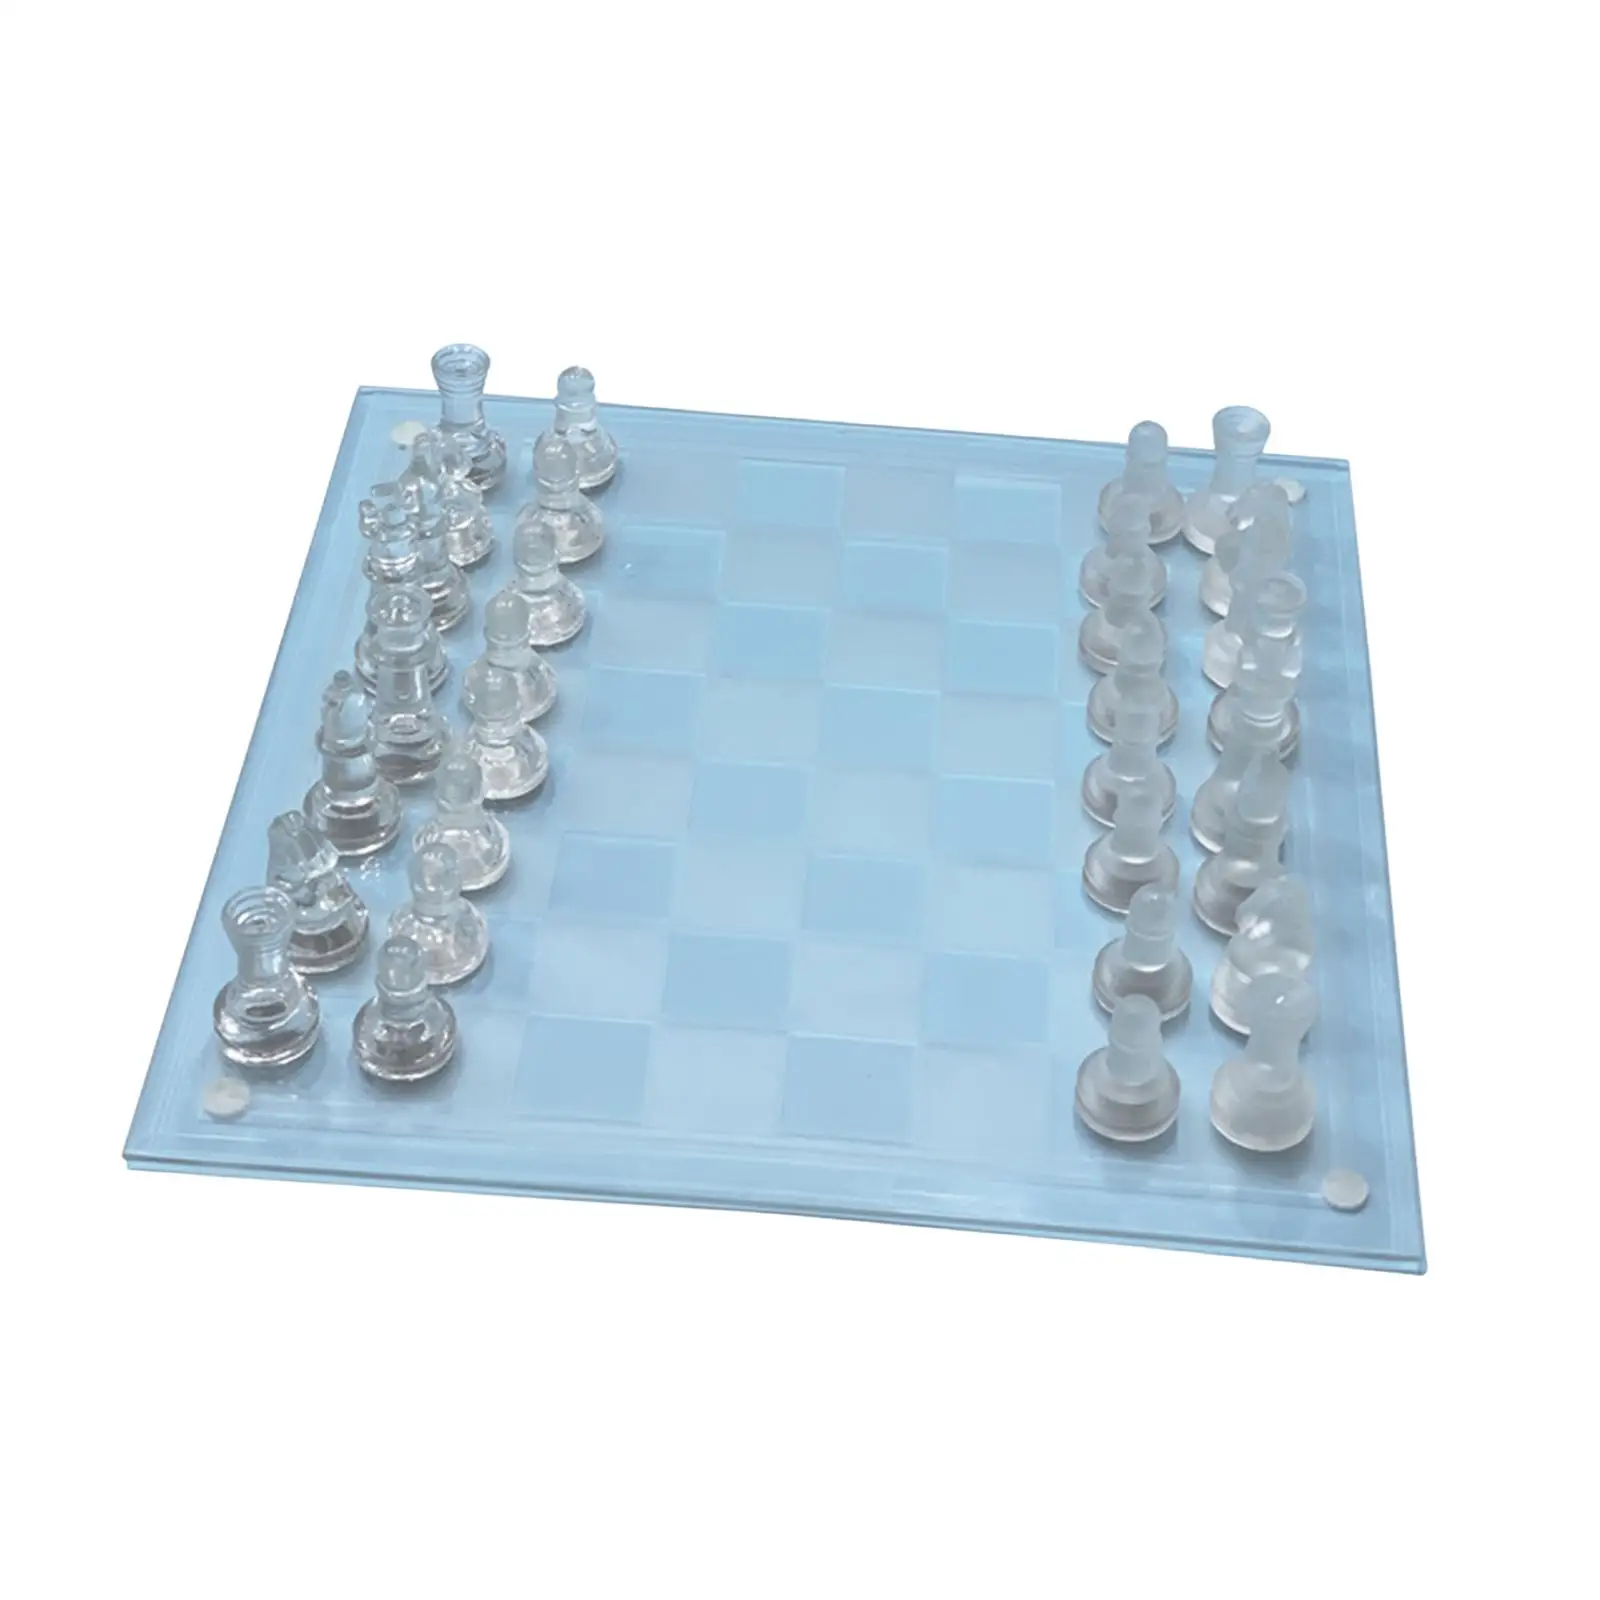 Glass Chess Game Early Education Portable Family Board Game Chess Set for Adult